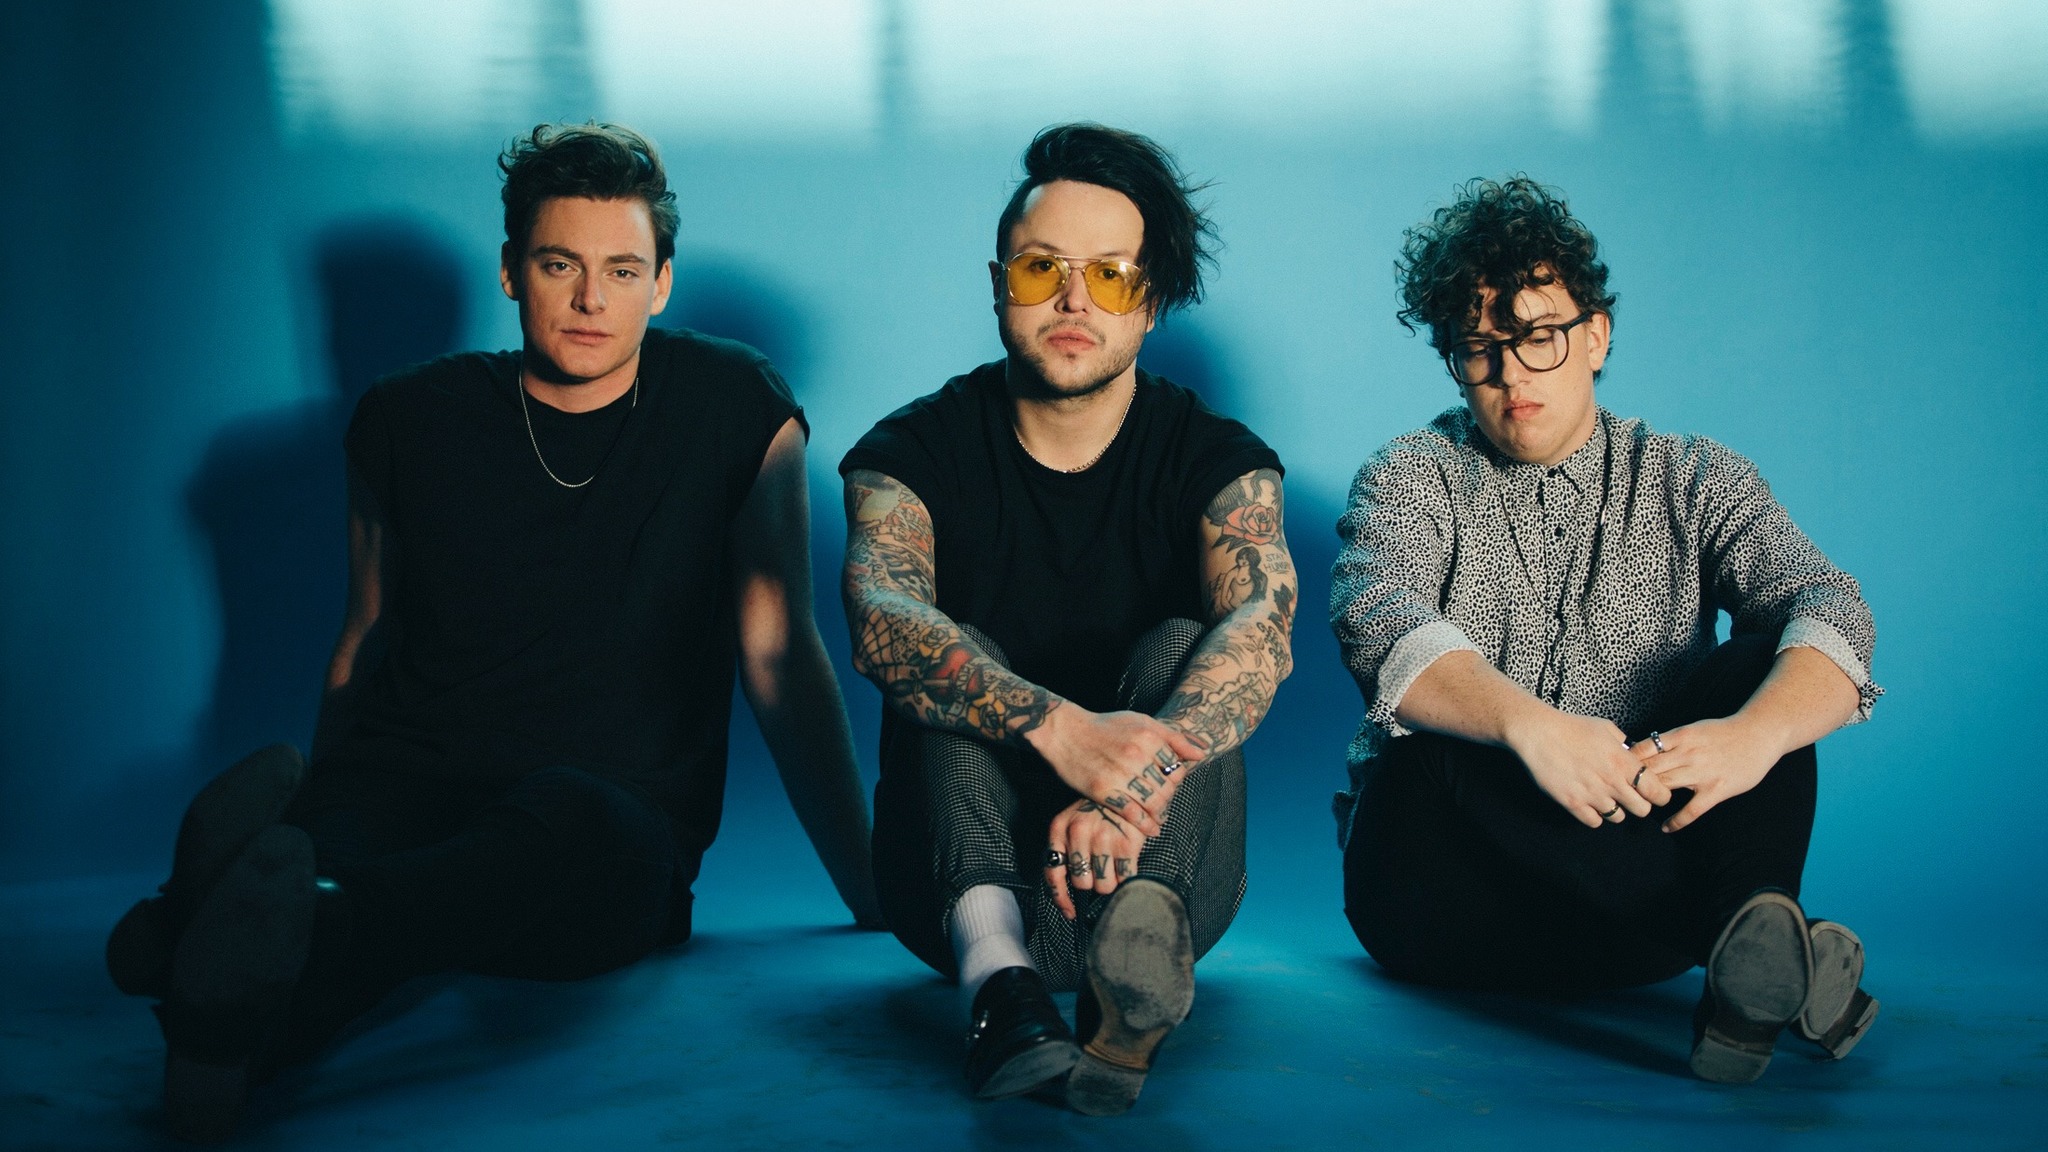 lovelytheband: The Finding It Hard to Smile Tour